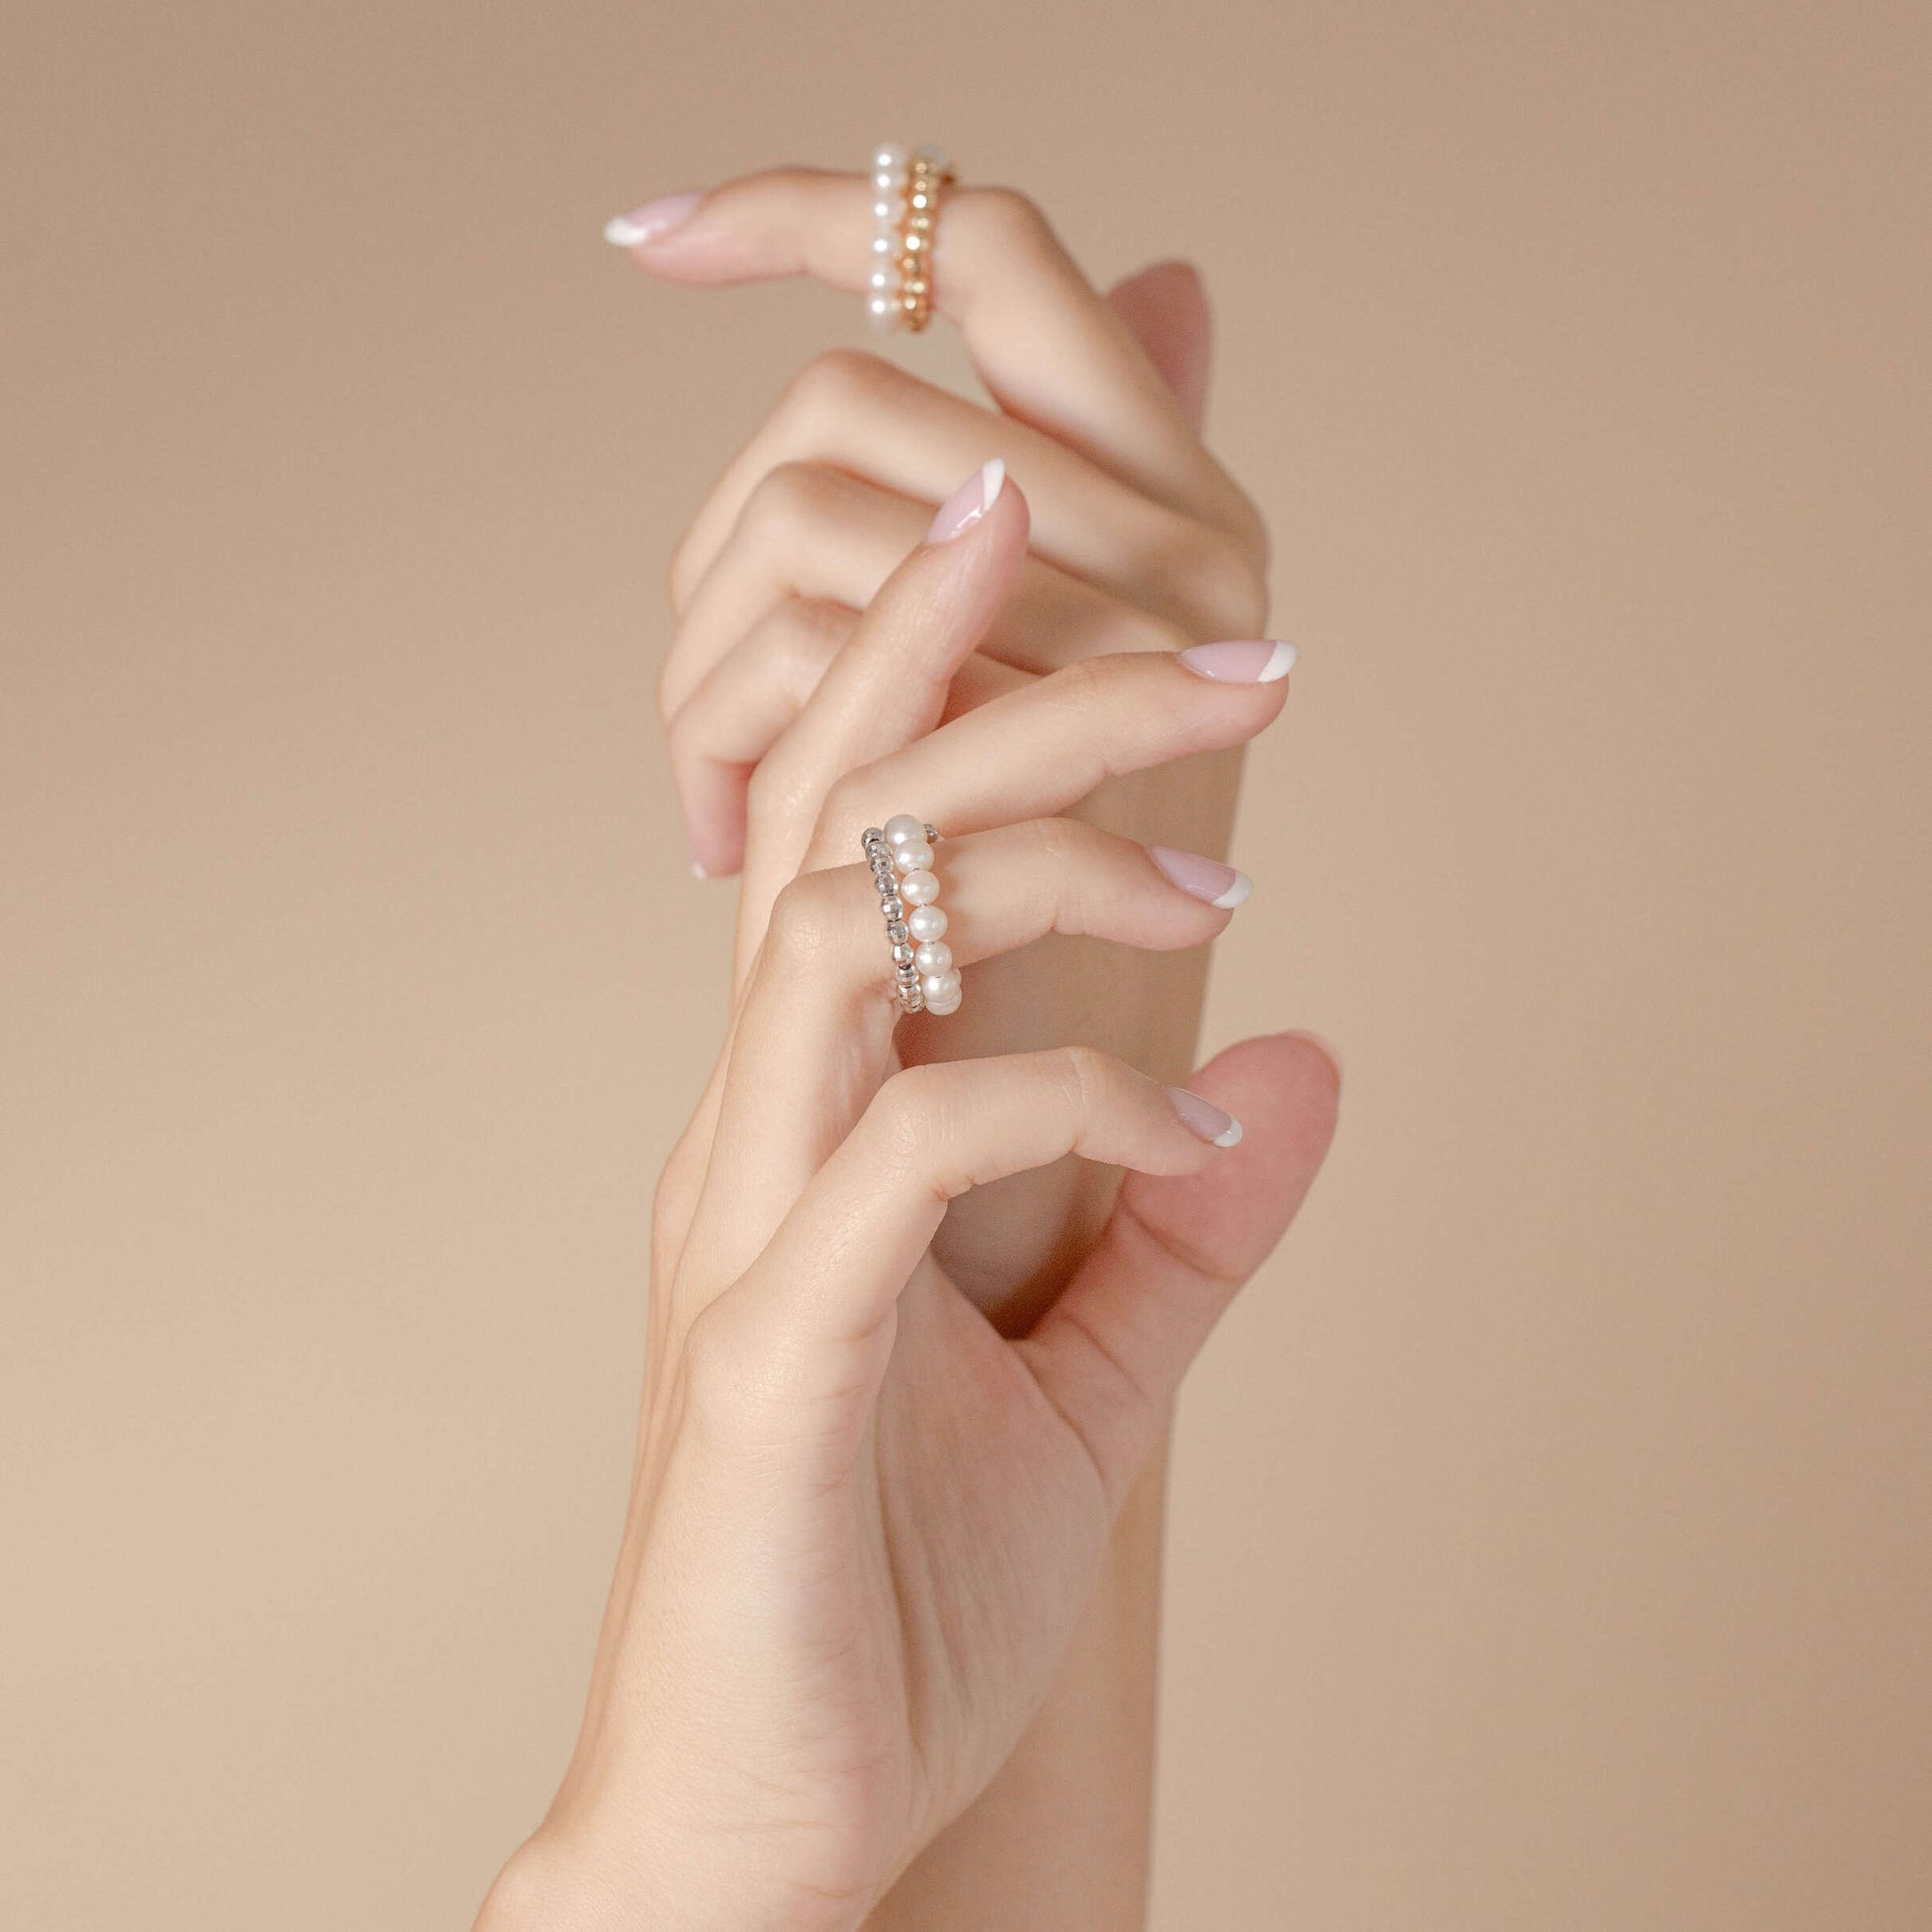 Enhance your elegance with Spiral Pearl x White Gold Ring adorning a woman's hands.